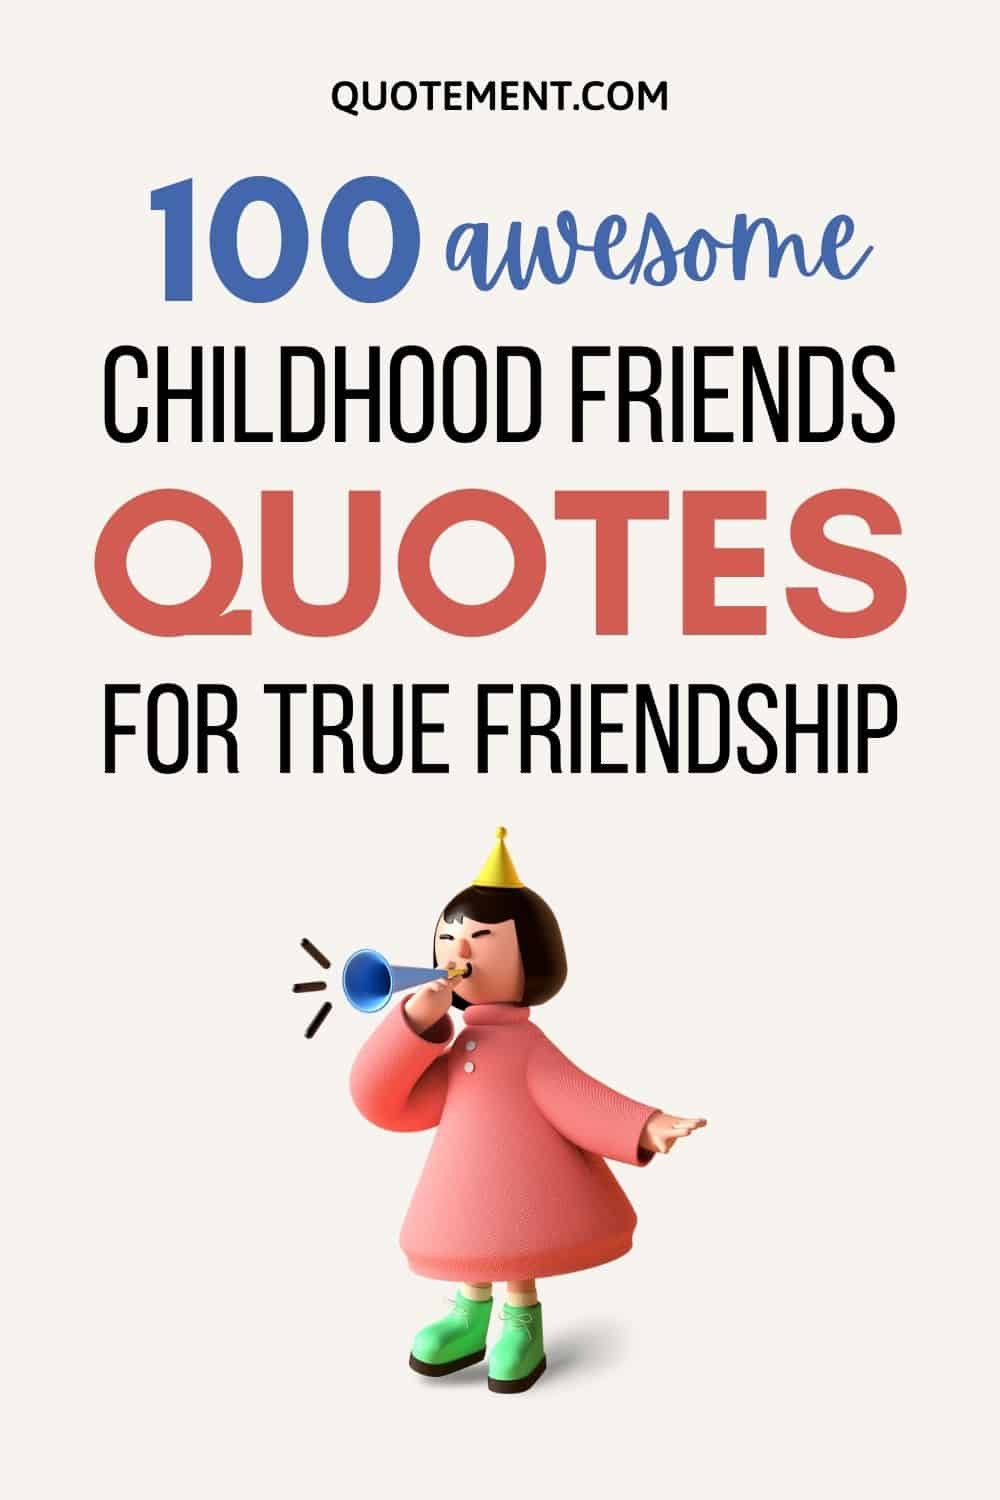 100 Awesome Childhood Friends Quotes For True Friendship